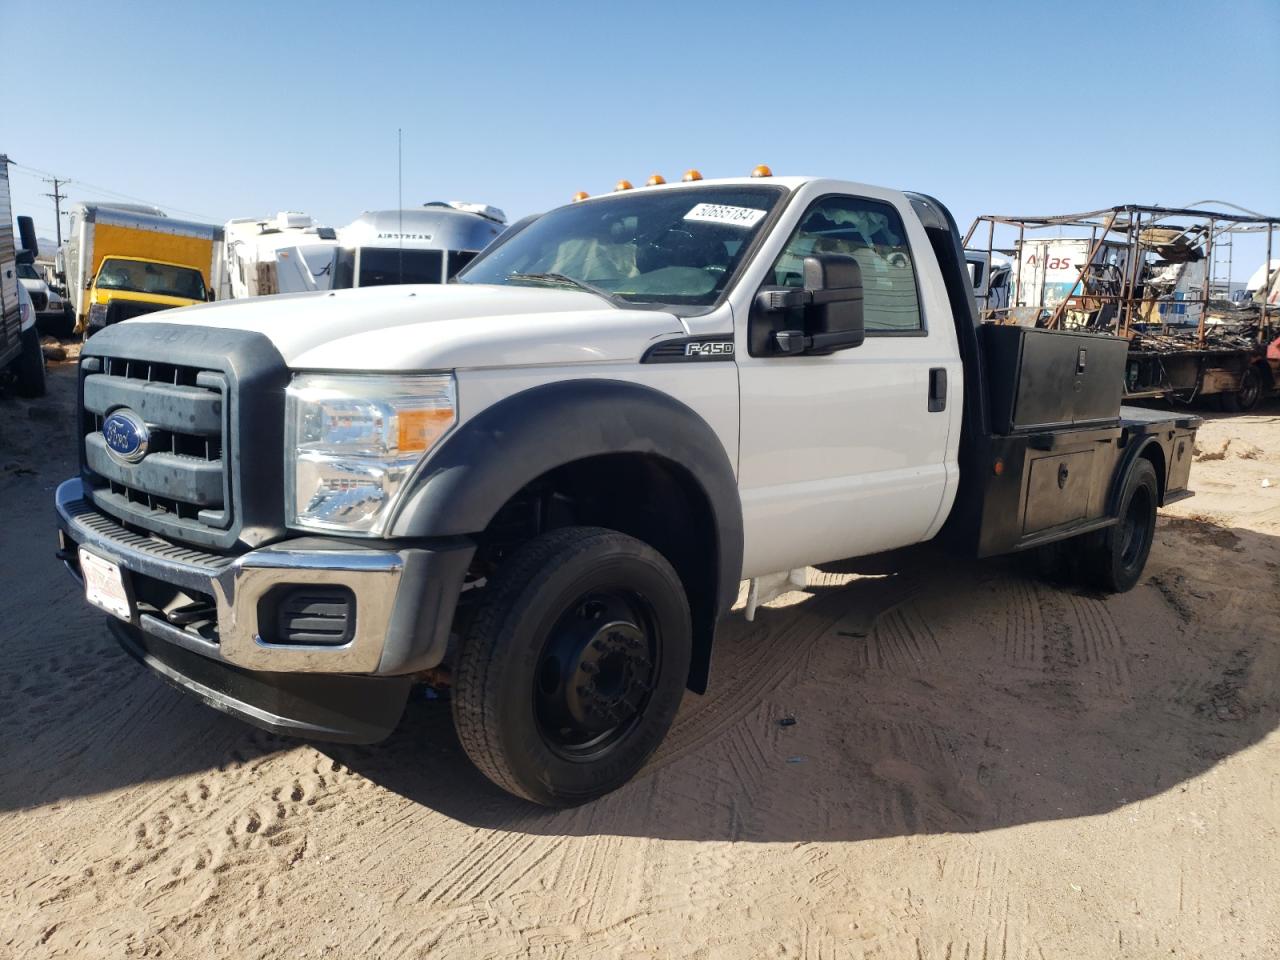 vin: 1FDUF4GY9GEB31603 1FDUF4GY9GEB31603 2016 ford f450 6800 for Sale in 87105 4755, Nm - Albuquerque, Albuquerque, New Mexico, USA